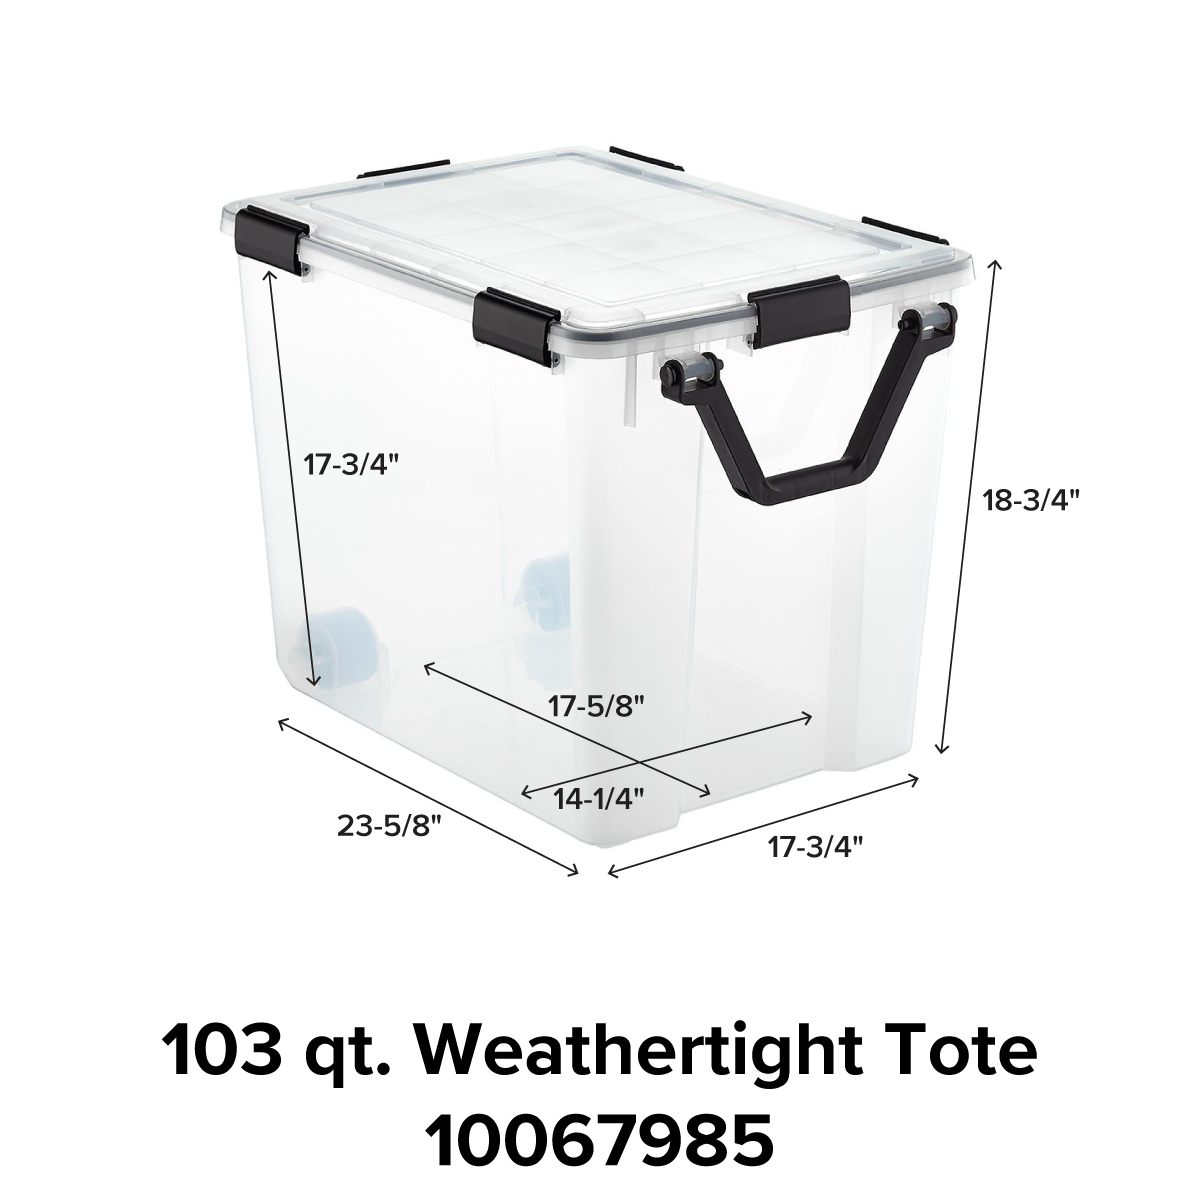 https://www.containerstore.com/catalogimages/480689/103qt_WeathertightTote_10067985.jpg